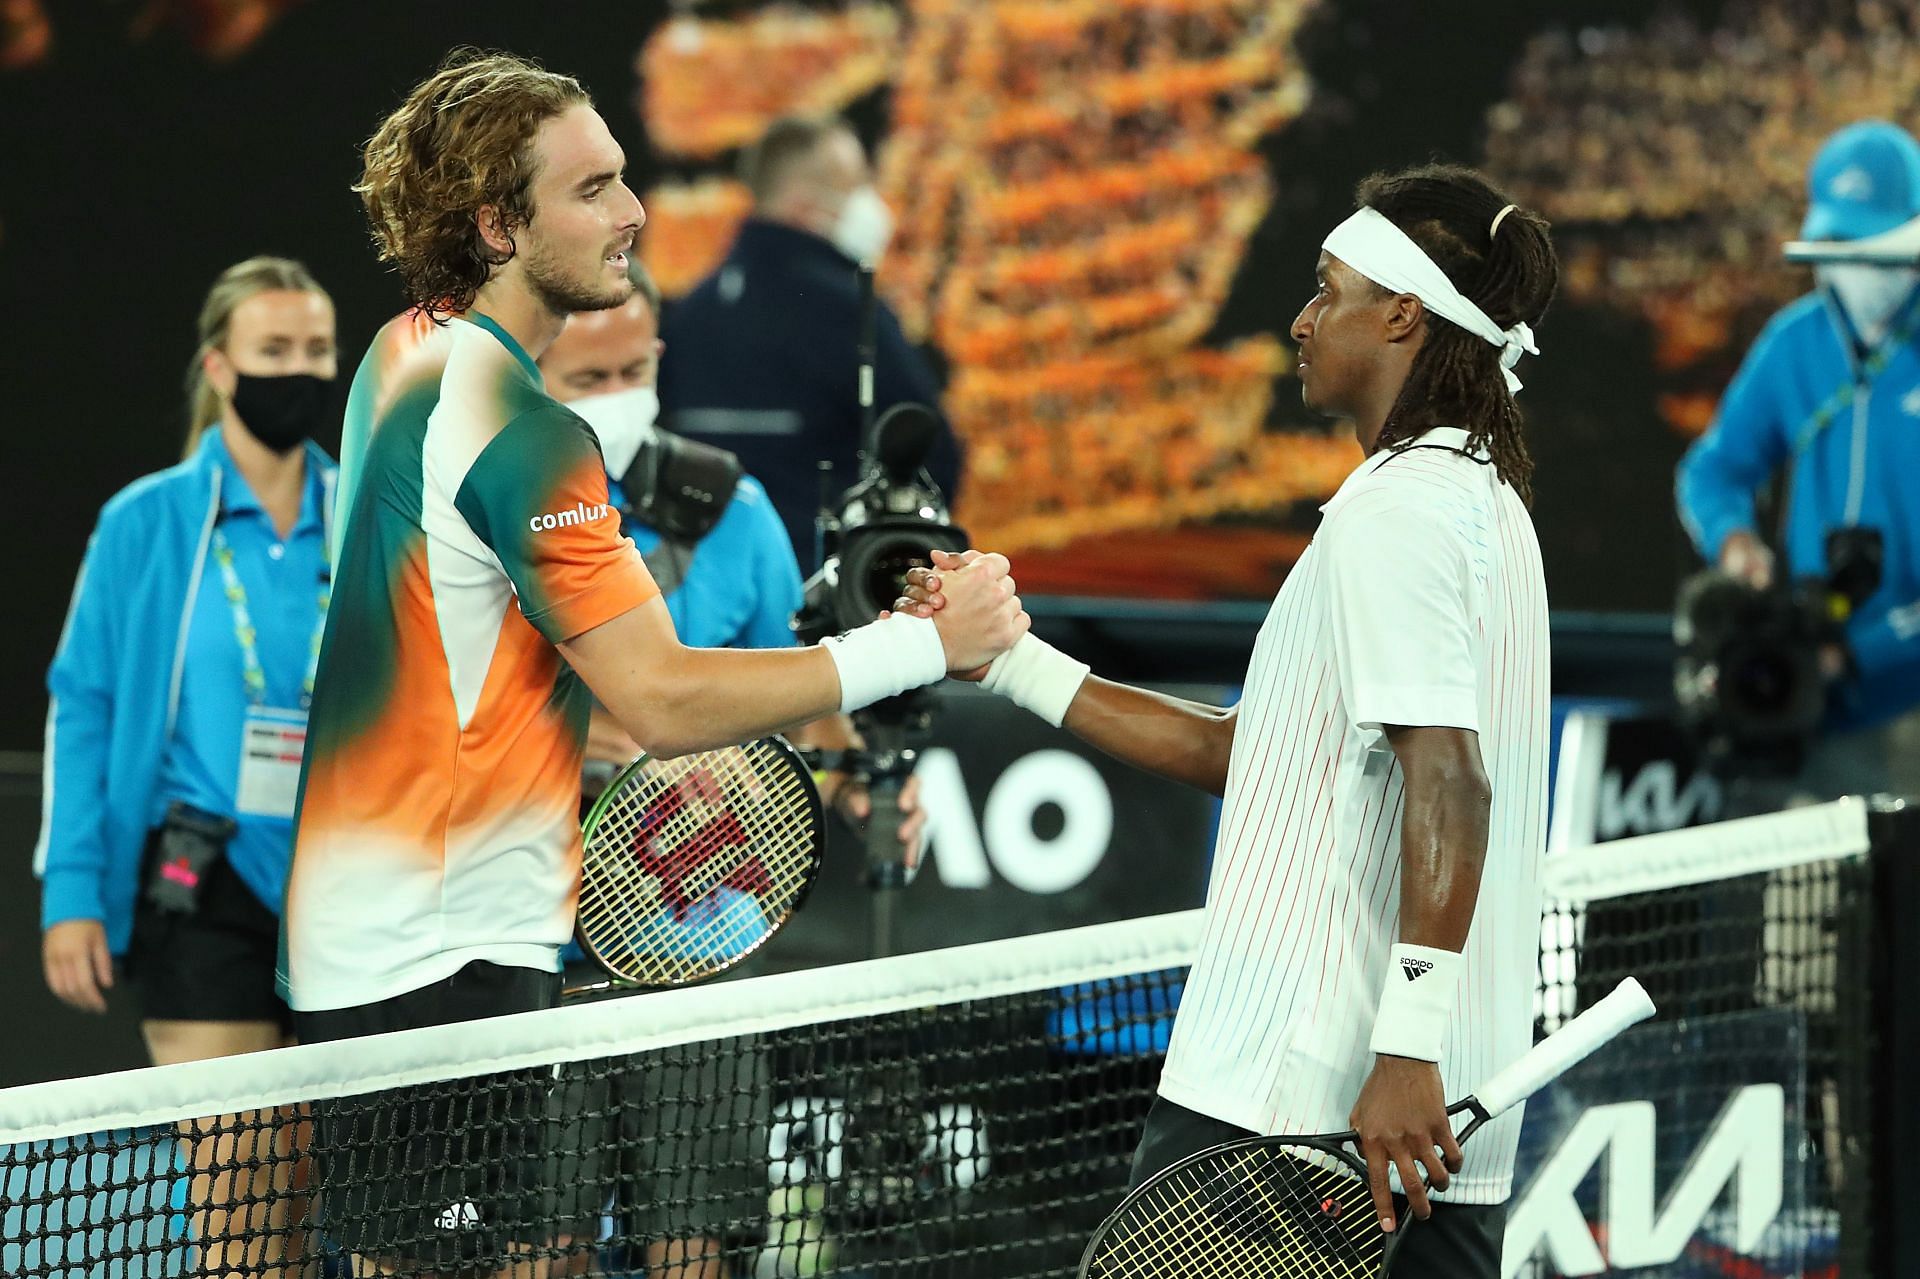 Stefanos Tsitsipas has defeated Mikael Ymer in all four of their previous clashes